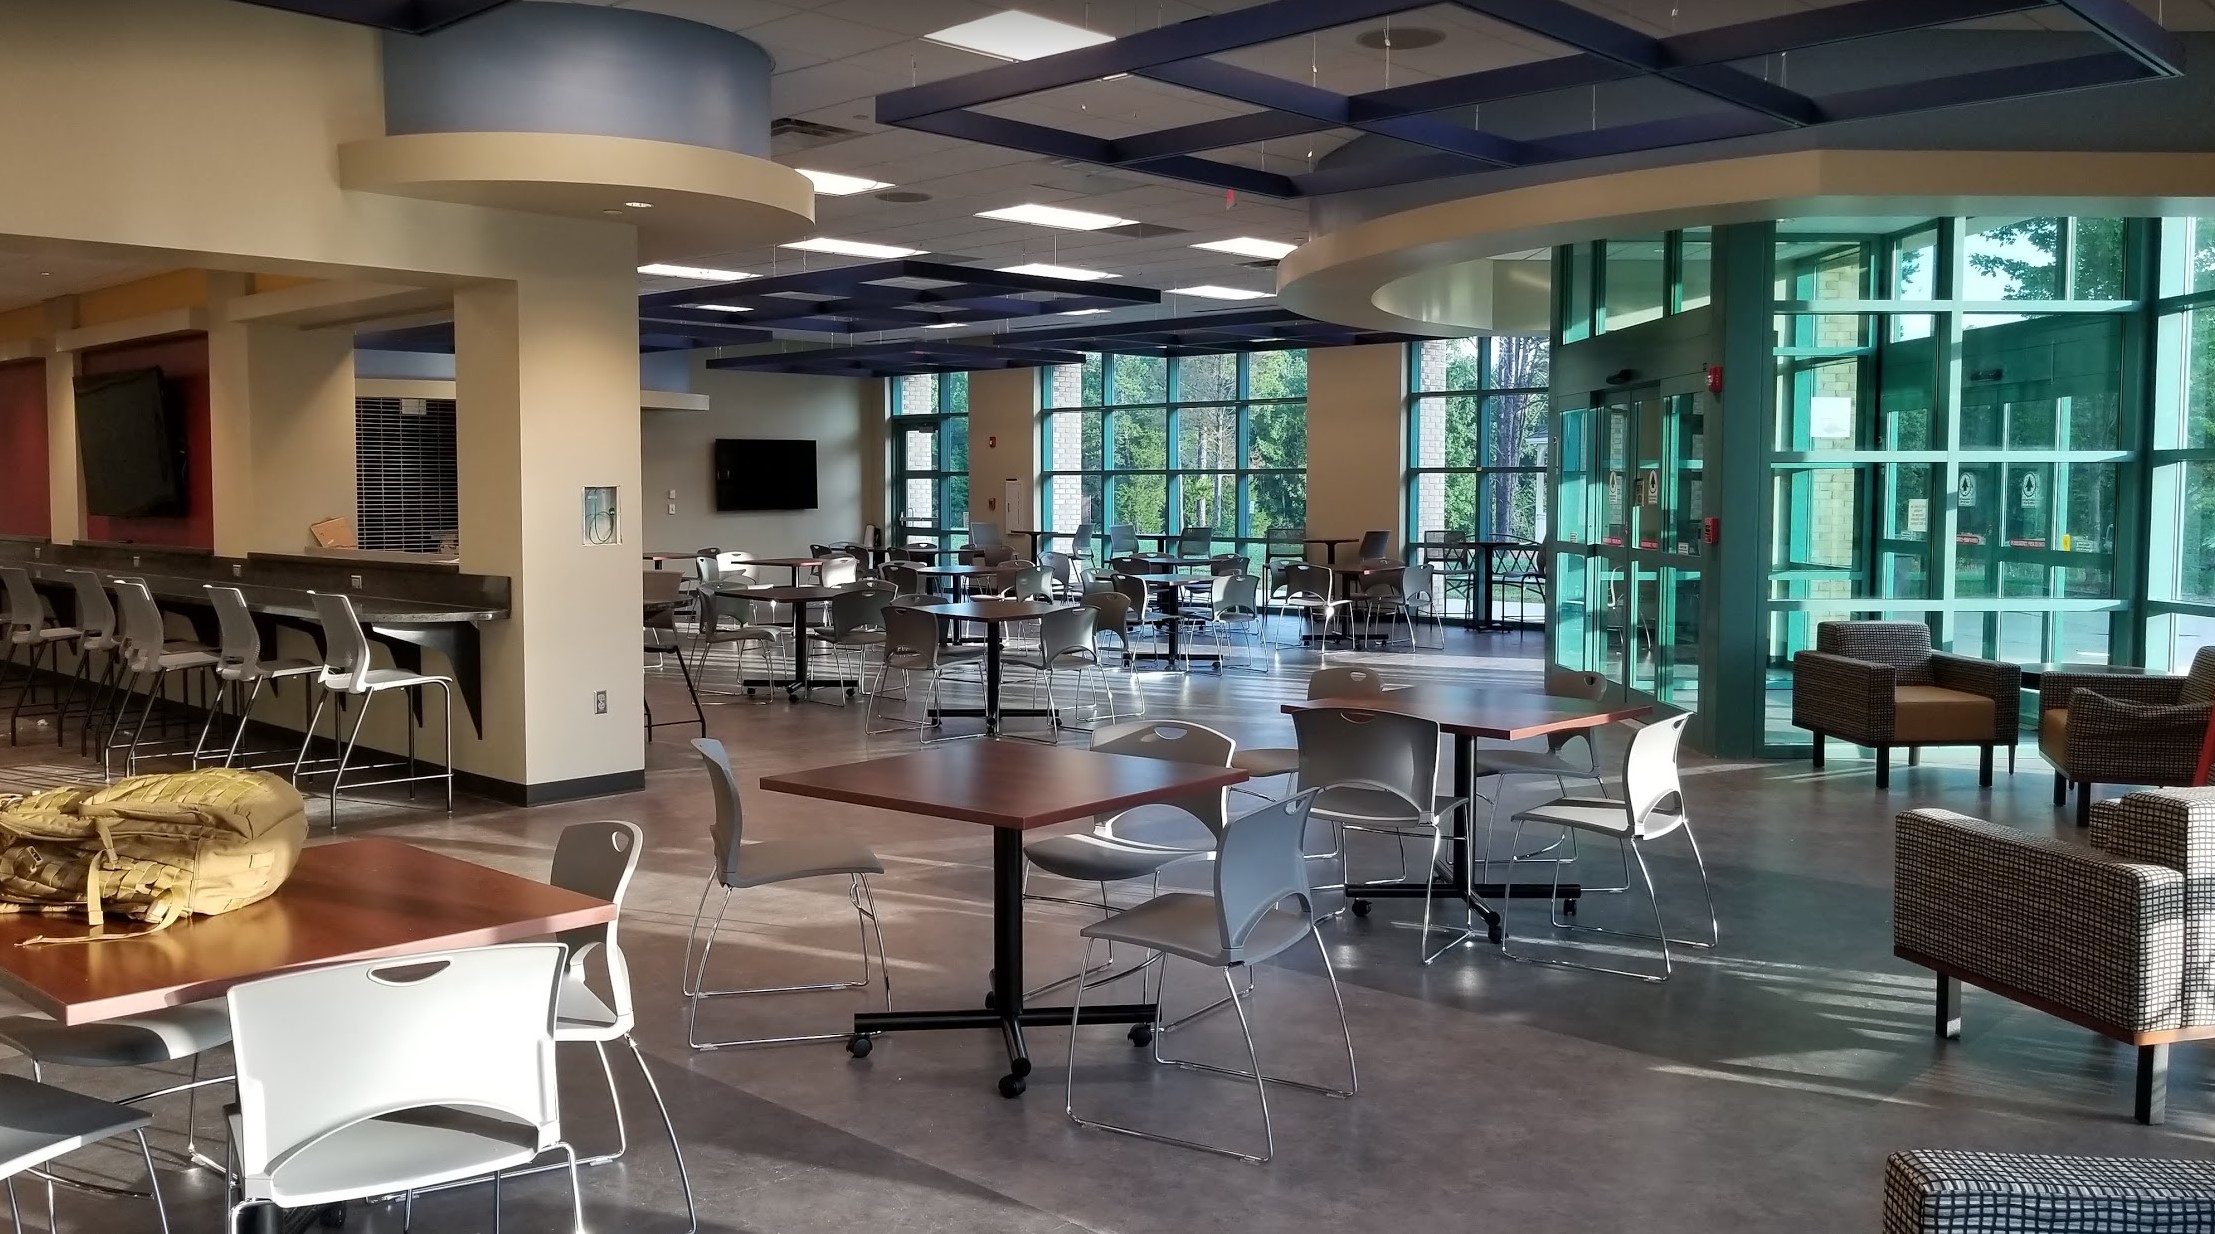 Building 3000 Student Center is open.